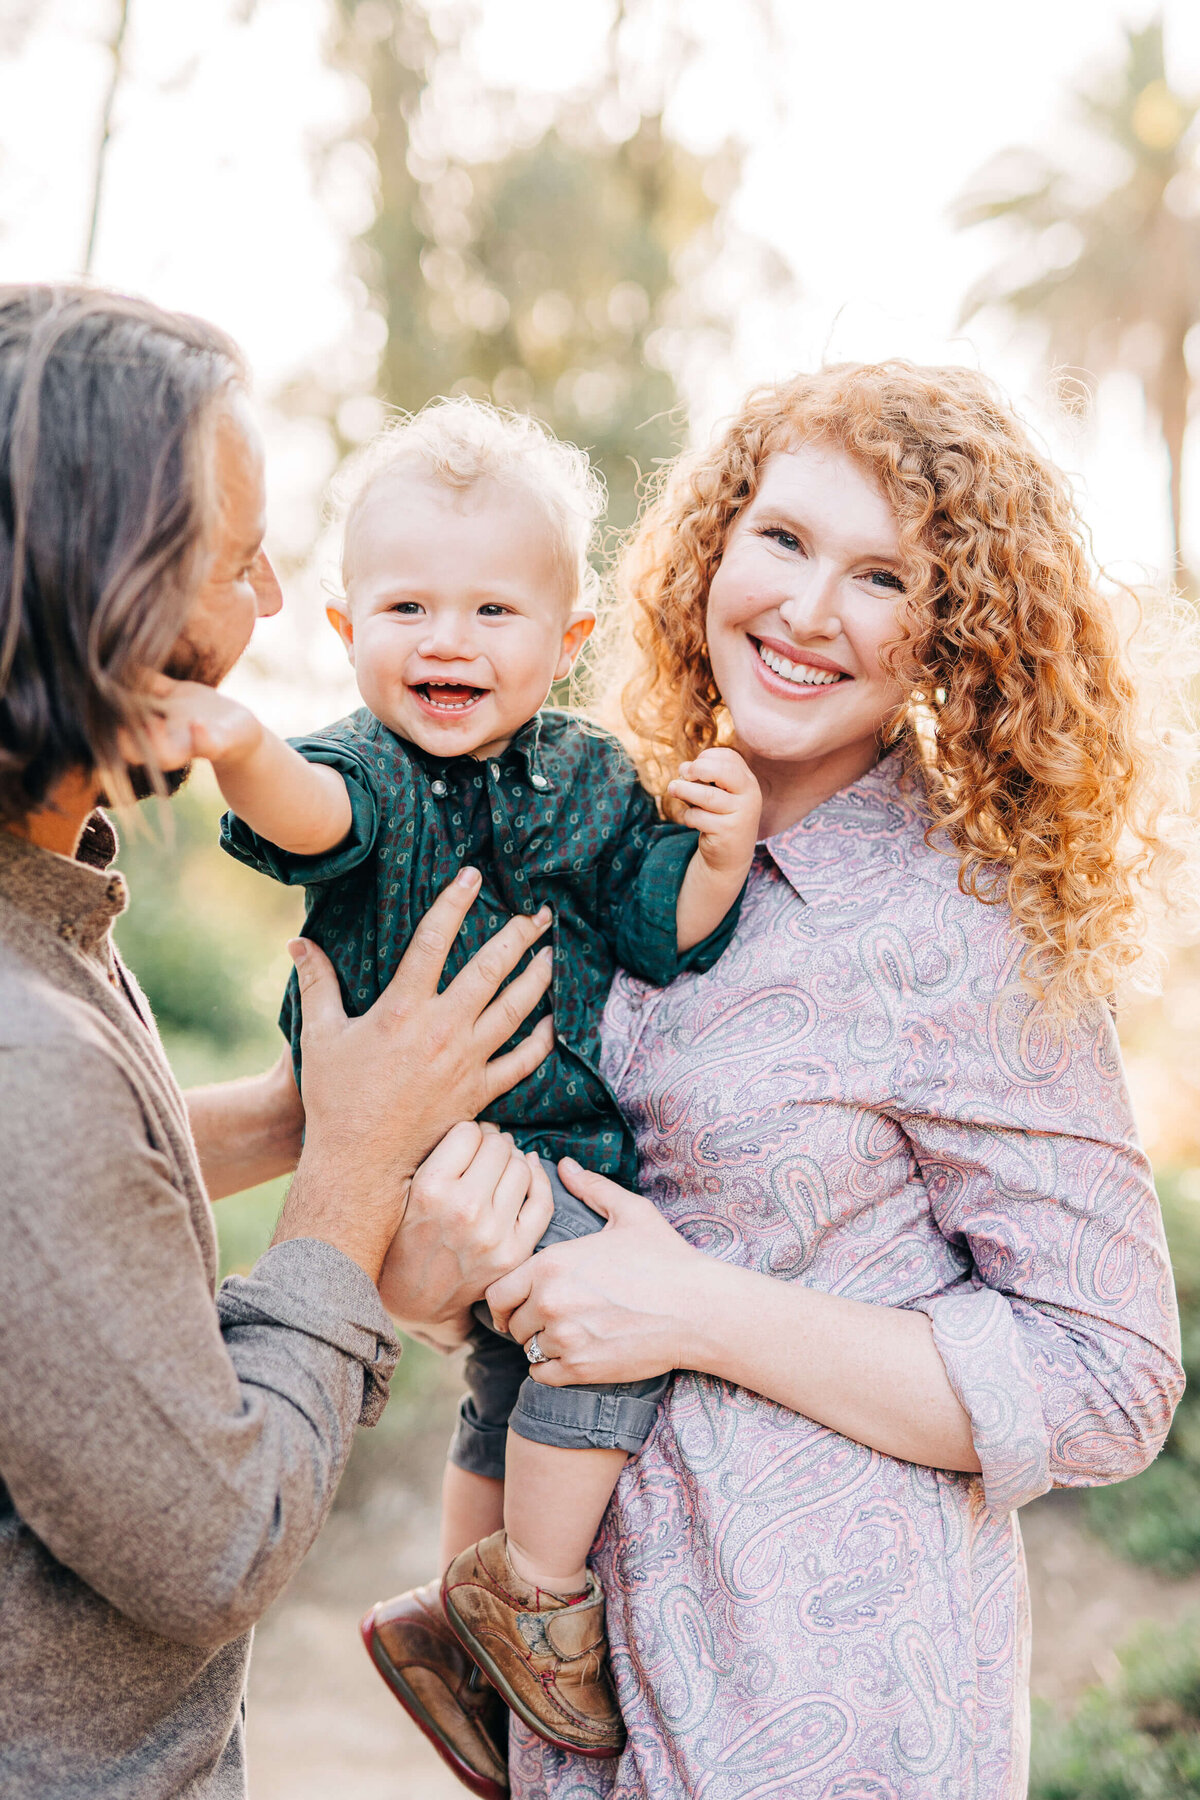 Baby is smiling and happy with his family during family photos